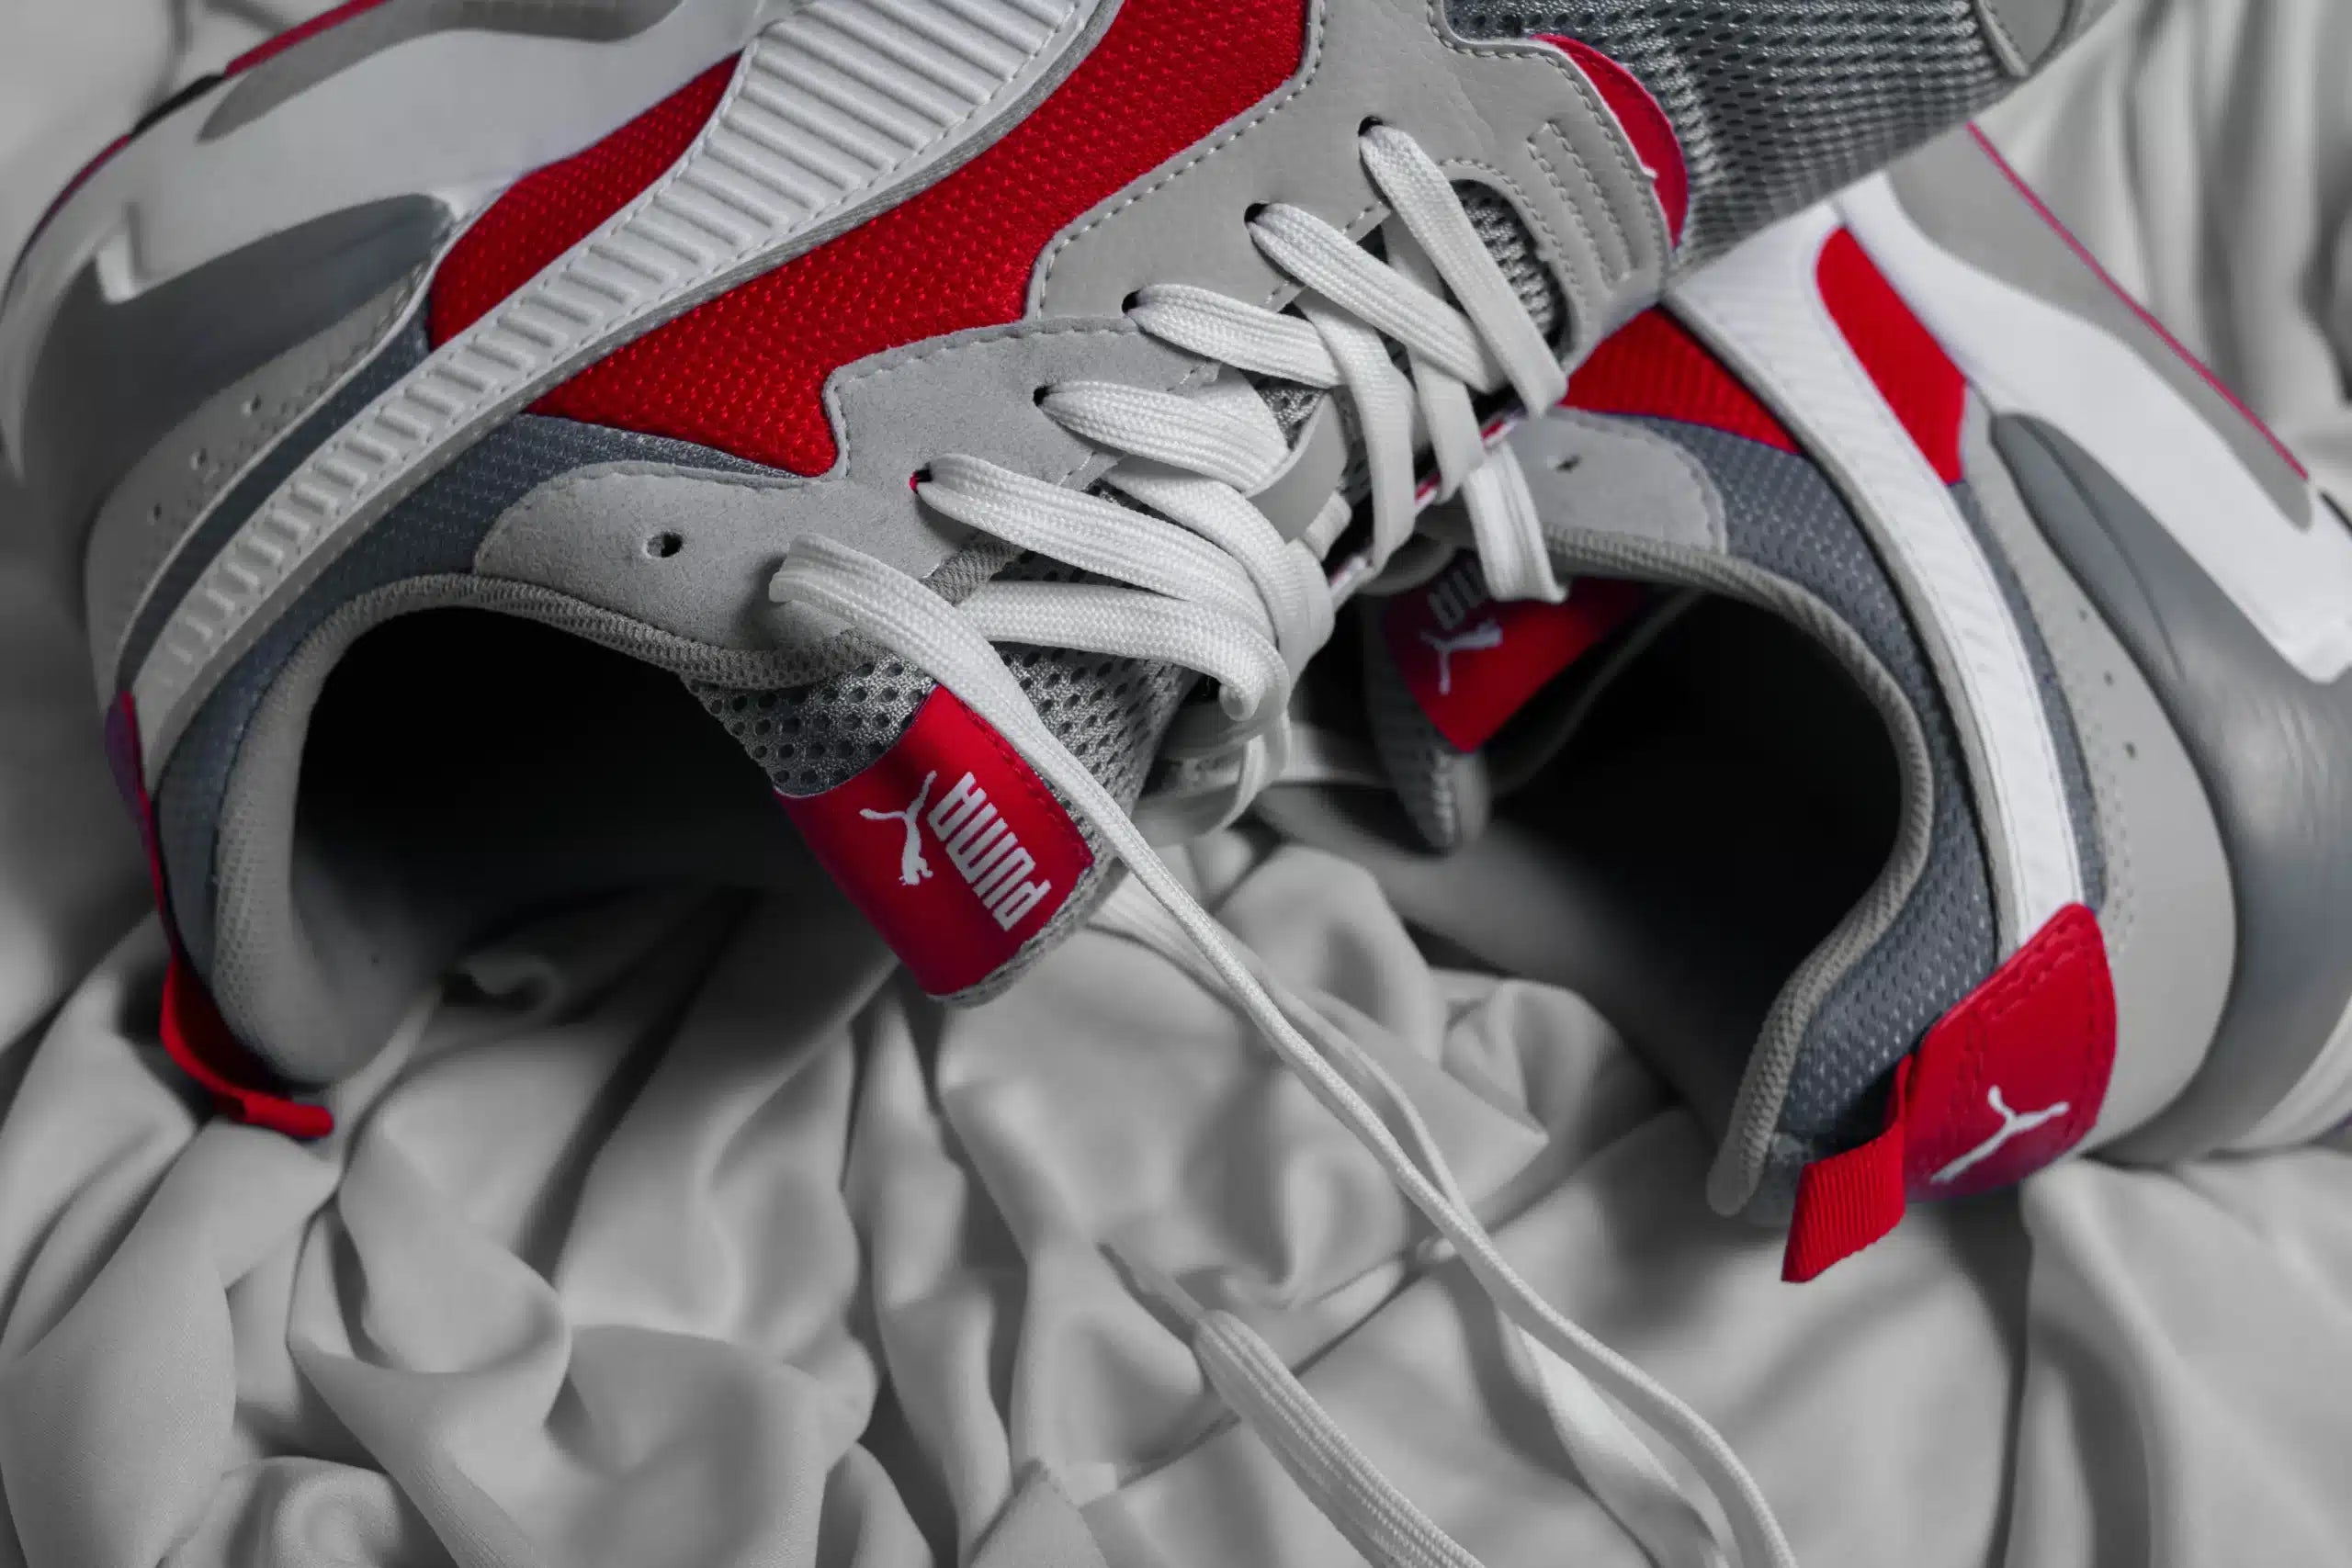 Red and gray sneakers on a bed. They have the best insoles for plantar fasciitis.